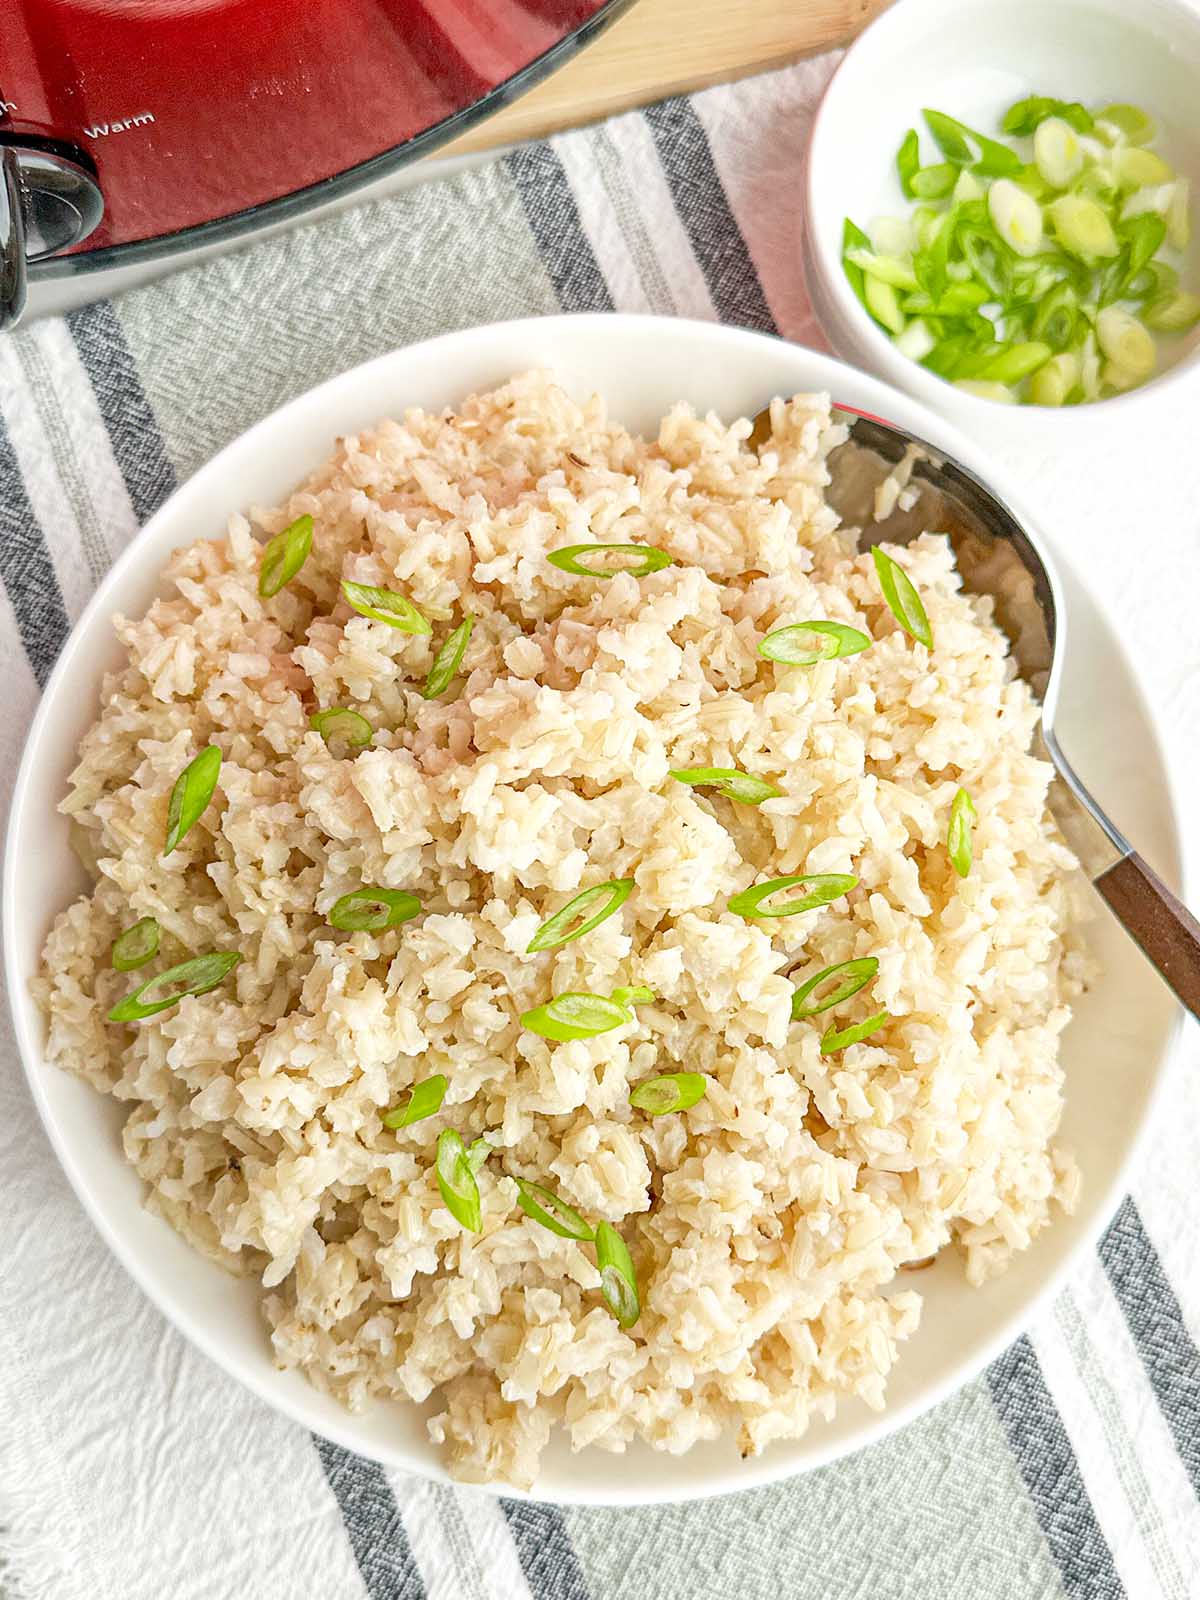 cooked brown rice and green onions in a white bowl by a red crock pot.